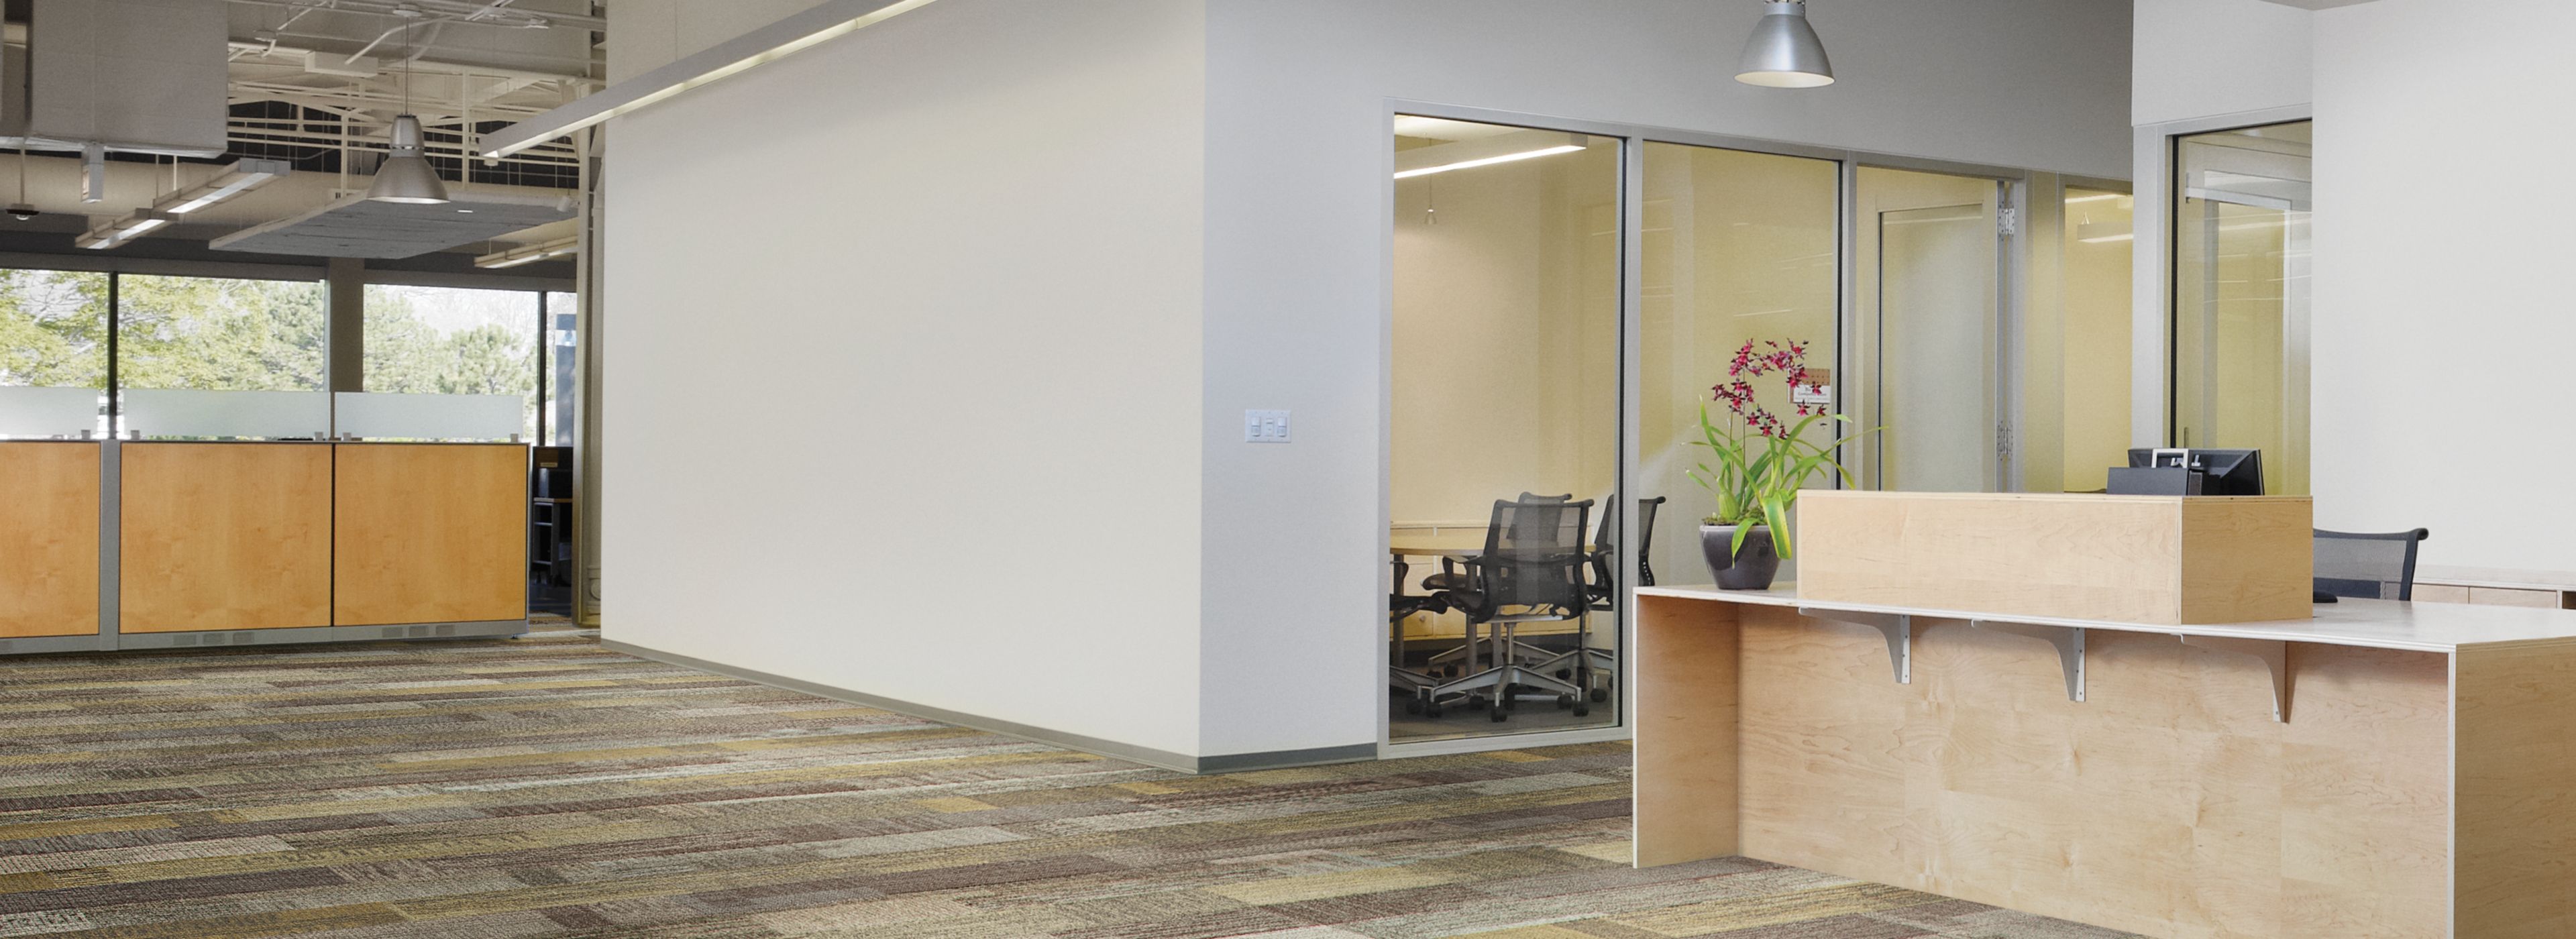 Interface Verticals plank carpet tile in open office setting with reception desk image number 1